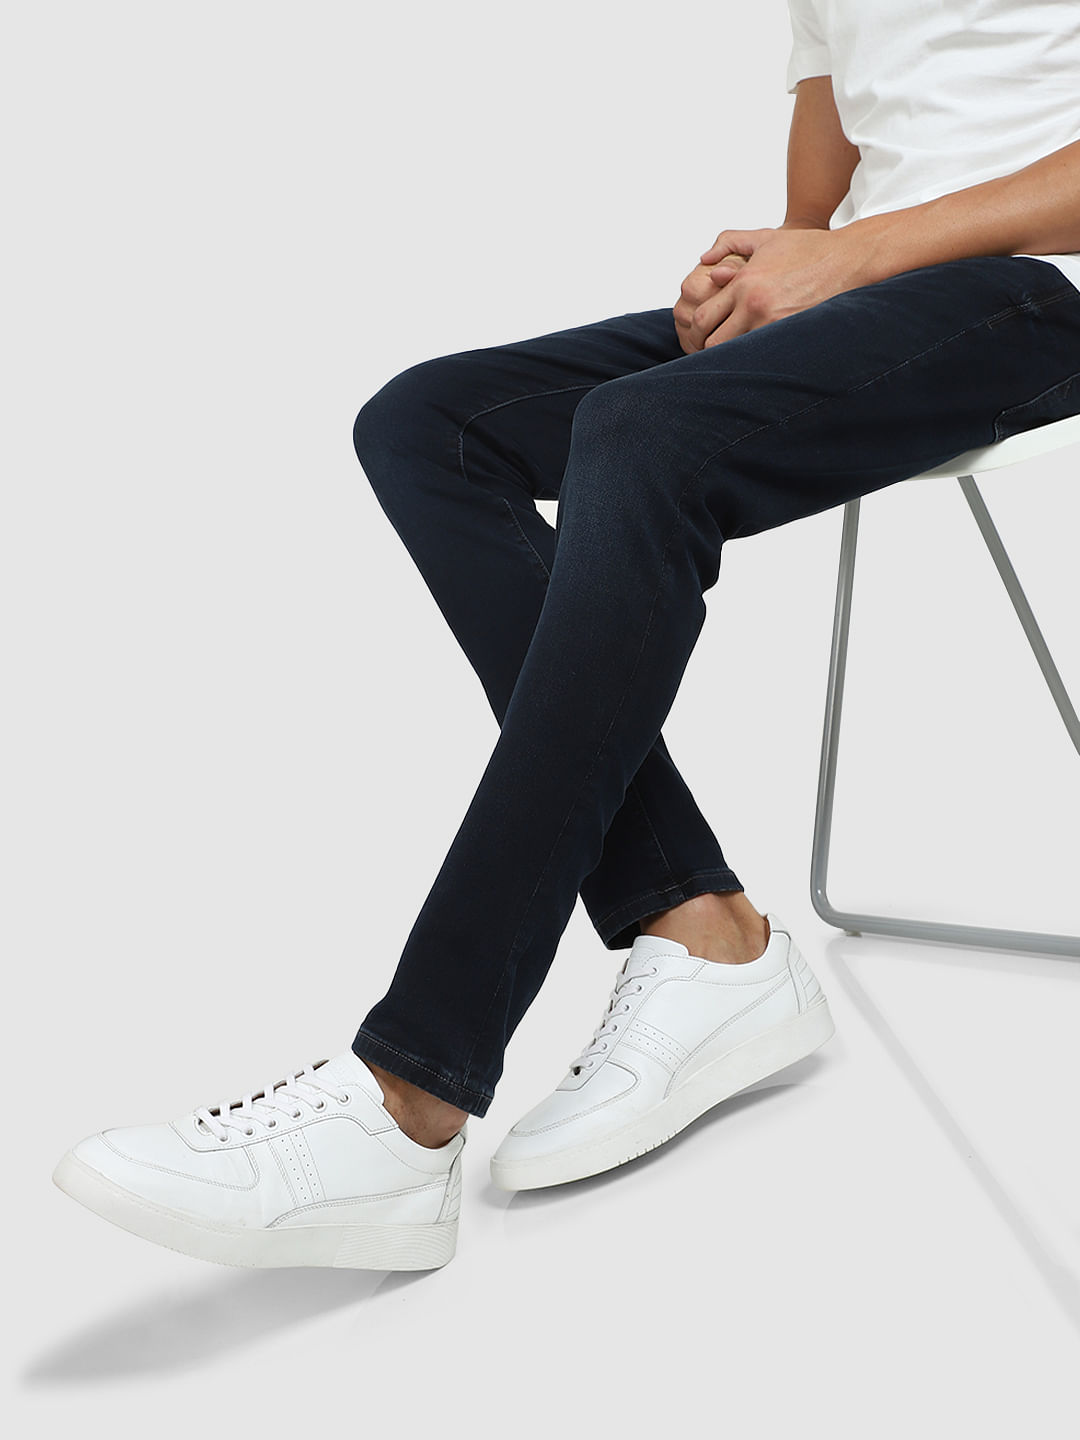 Veja Quickly Became One of The Most Talked-About Sneaker Brands | Fashion  jackson, Short outfits, Fashion outfits